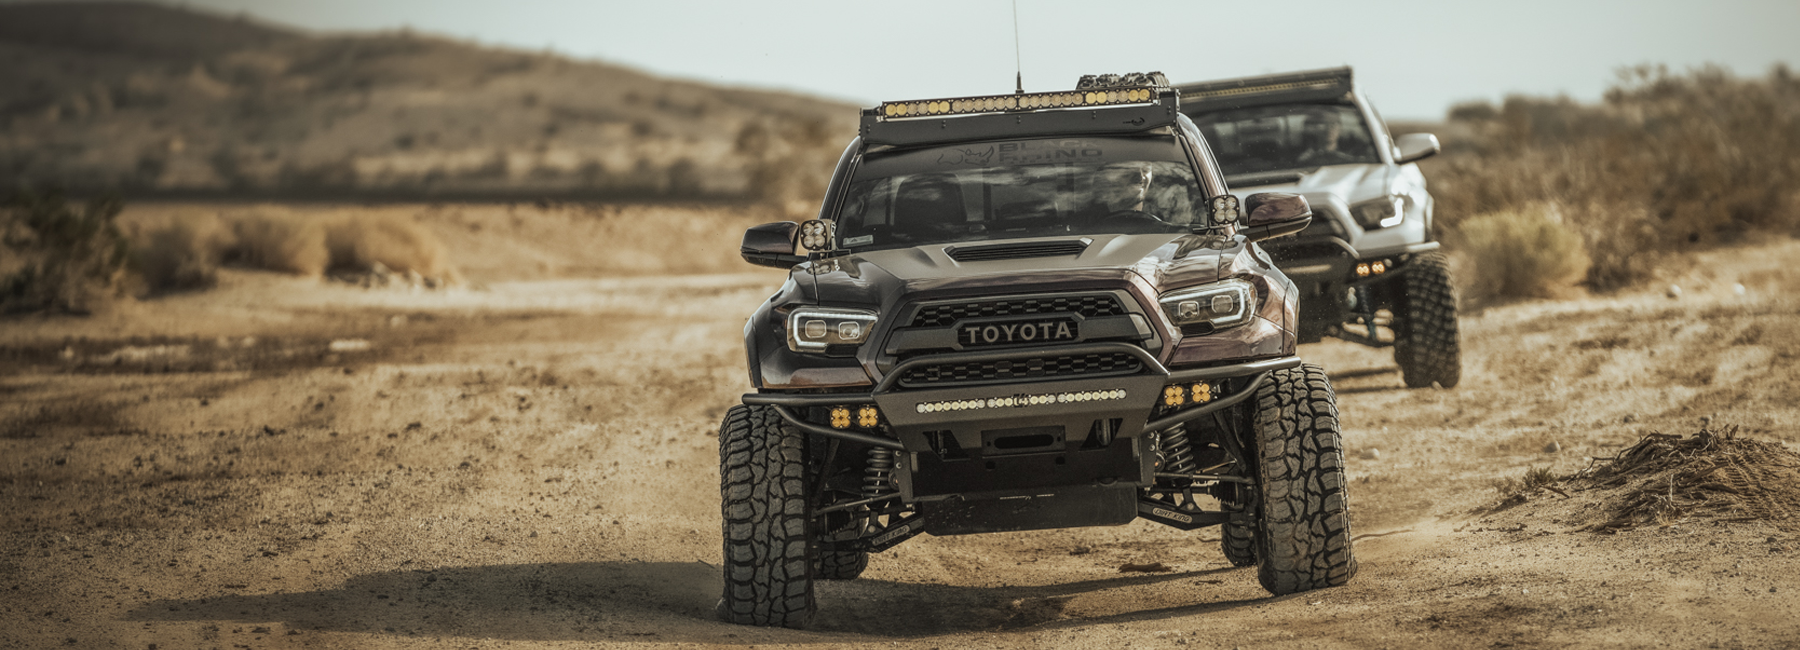 3rd Generation Toyota Tacoma with c4 fabrication hybrid off-road steel bumper with bull bar and off-road lights made for the trails and overlanding camping products adventure off-road products rooftop tent wheels trail riding